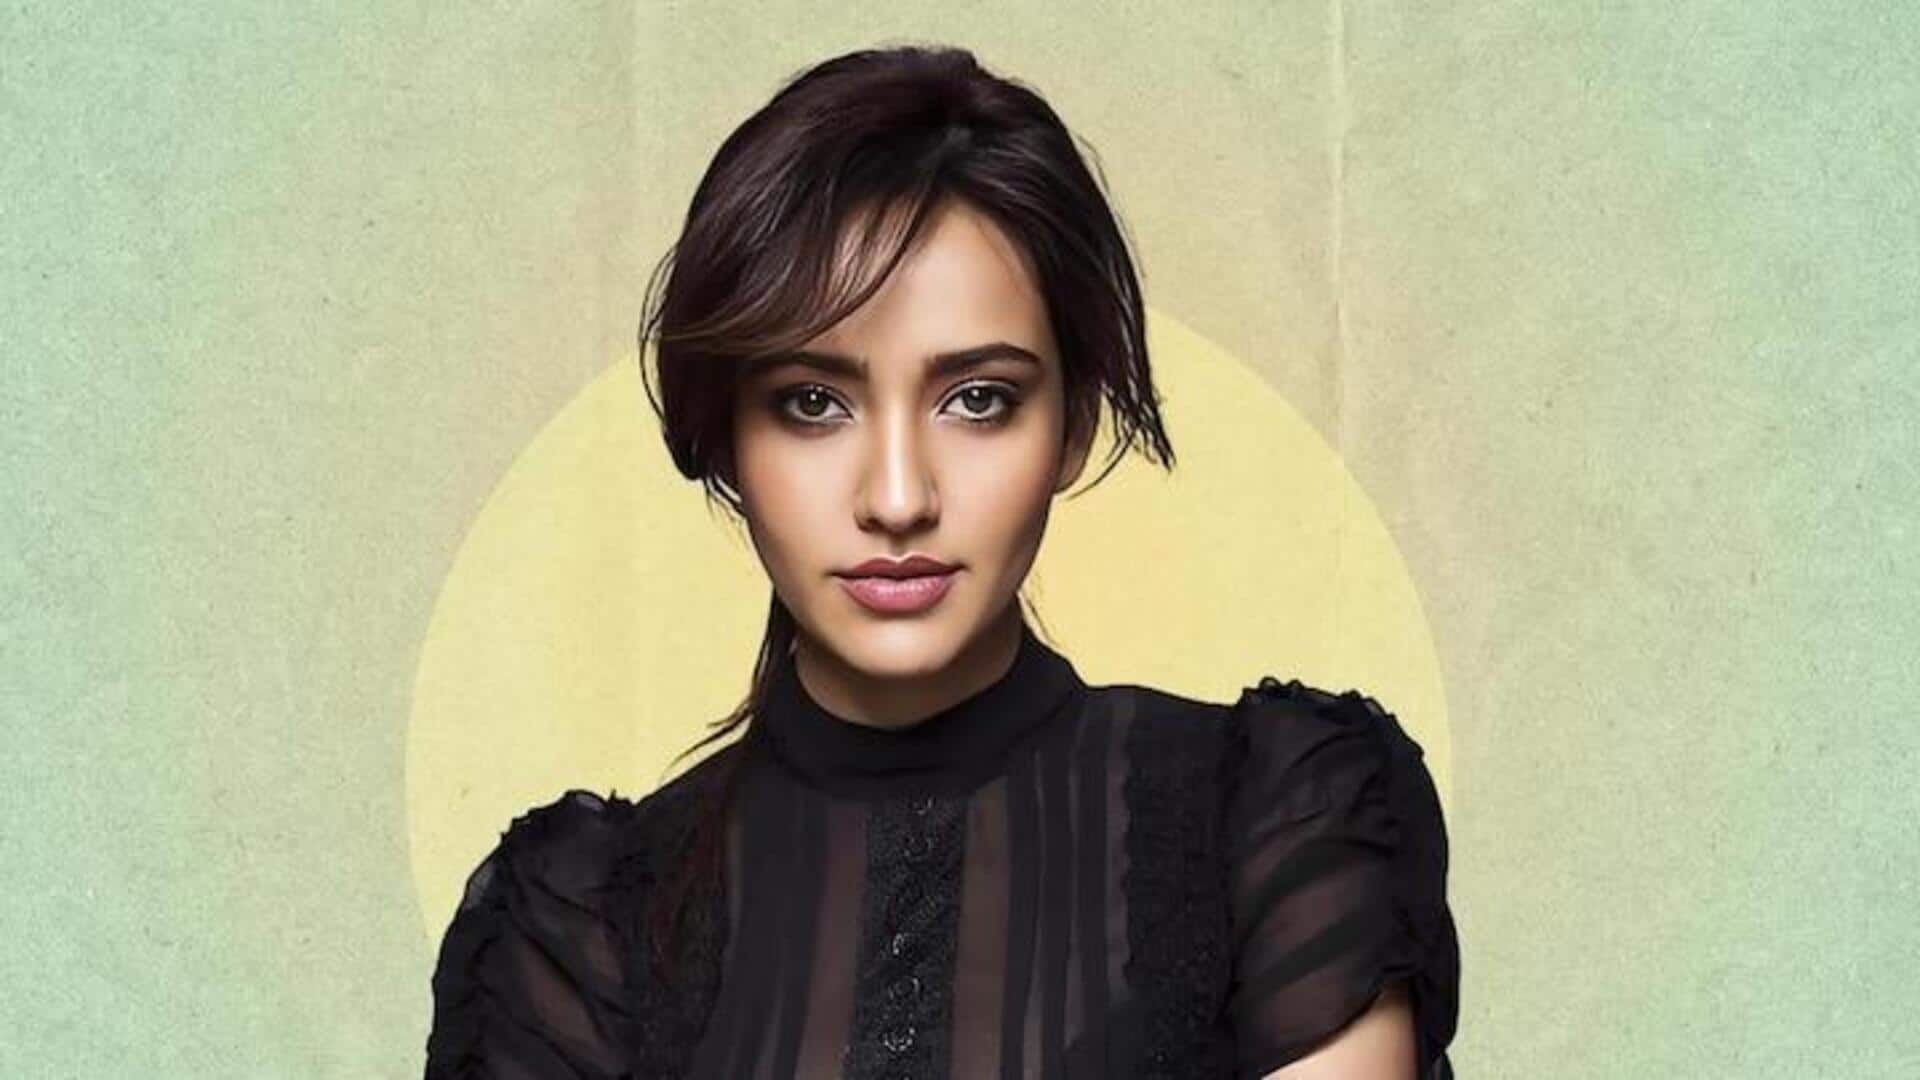 Neha Sharma lost roles due to being 'too pretty'